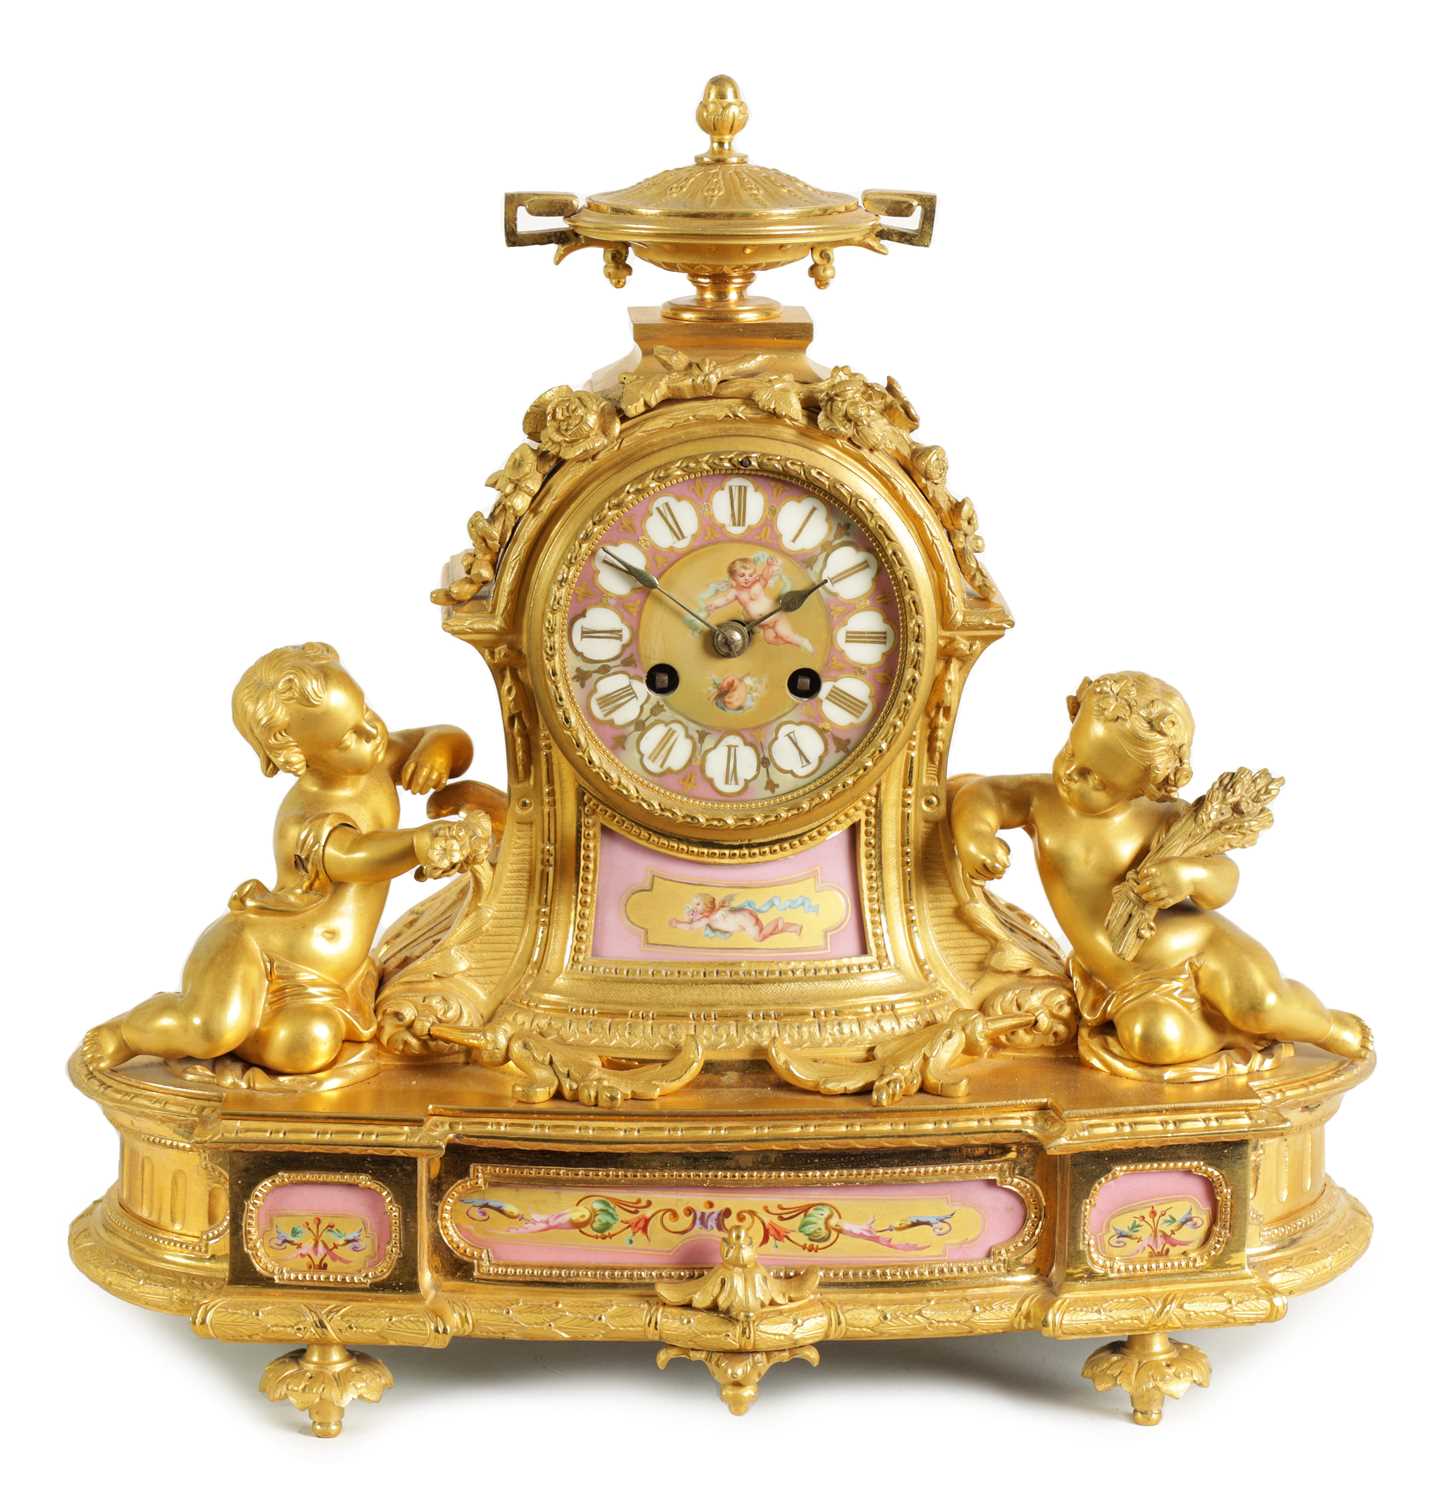 A LATE 19TH CENTURY FRENCH ORMOLU AND PORCELAIN PANELLED FIGURAL MANTEL CLOCK